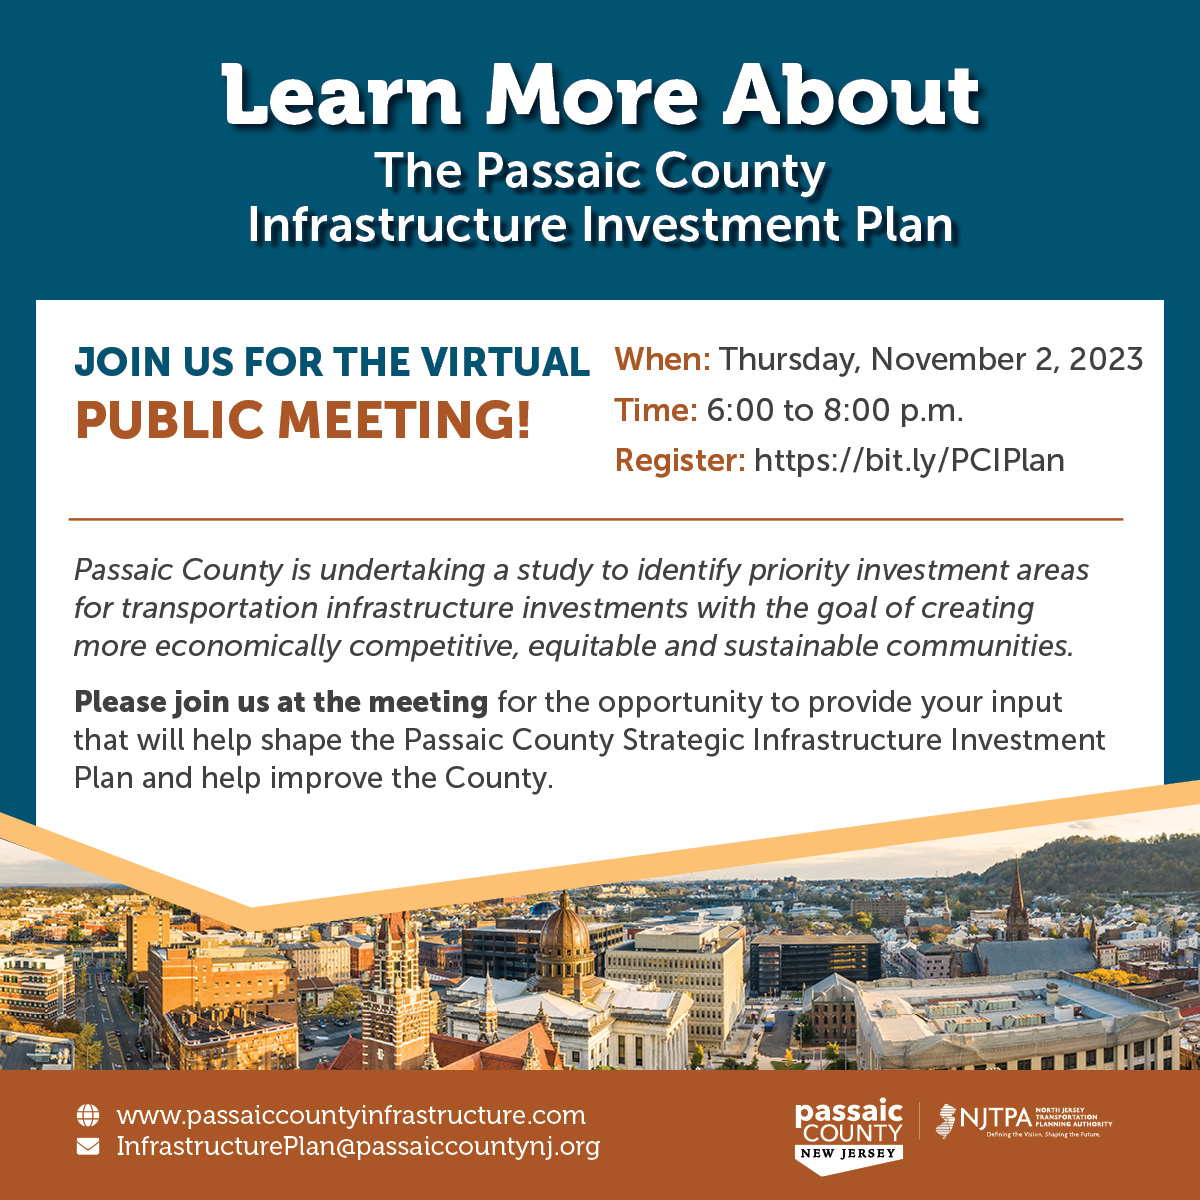 Passaic County is conducting a public input meeting for the County’s Strategic Infrastructure Investment Plan! Join us next Thursday at 6PM! Link to register for the Zoom virtual meeting: bit.ly/PCIPlan